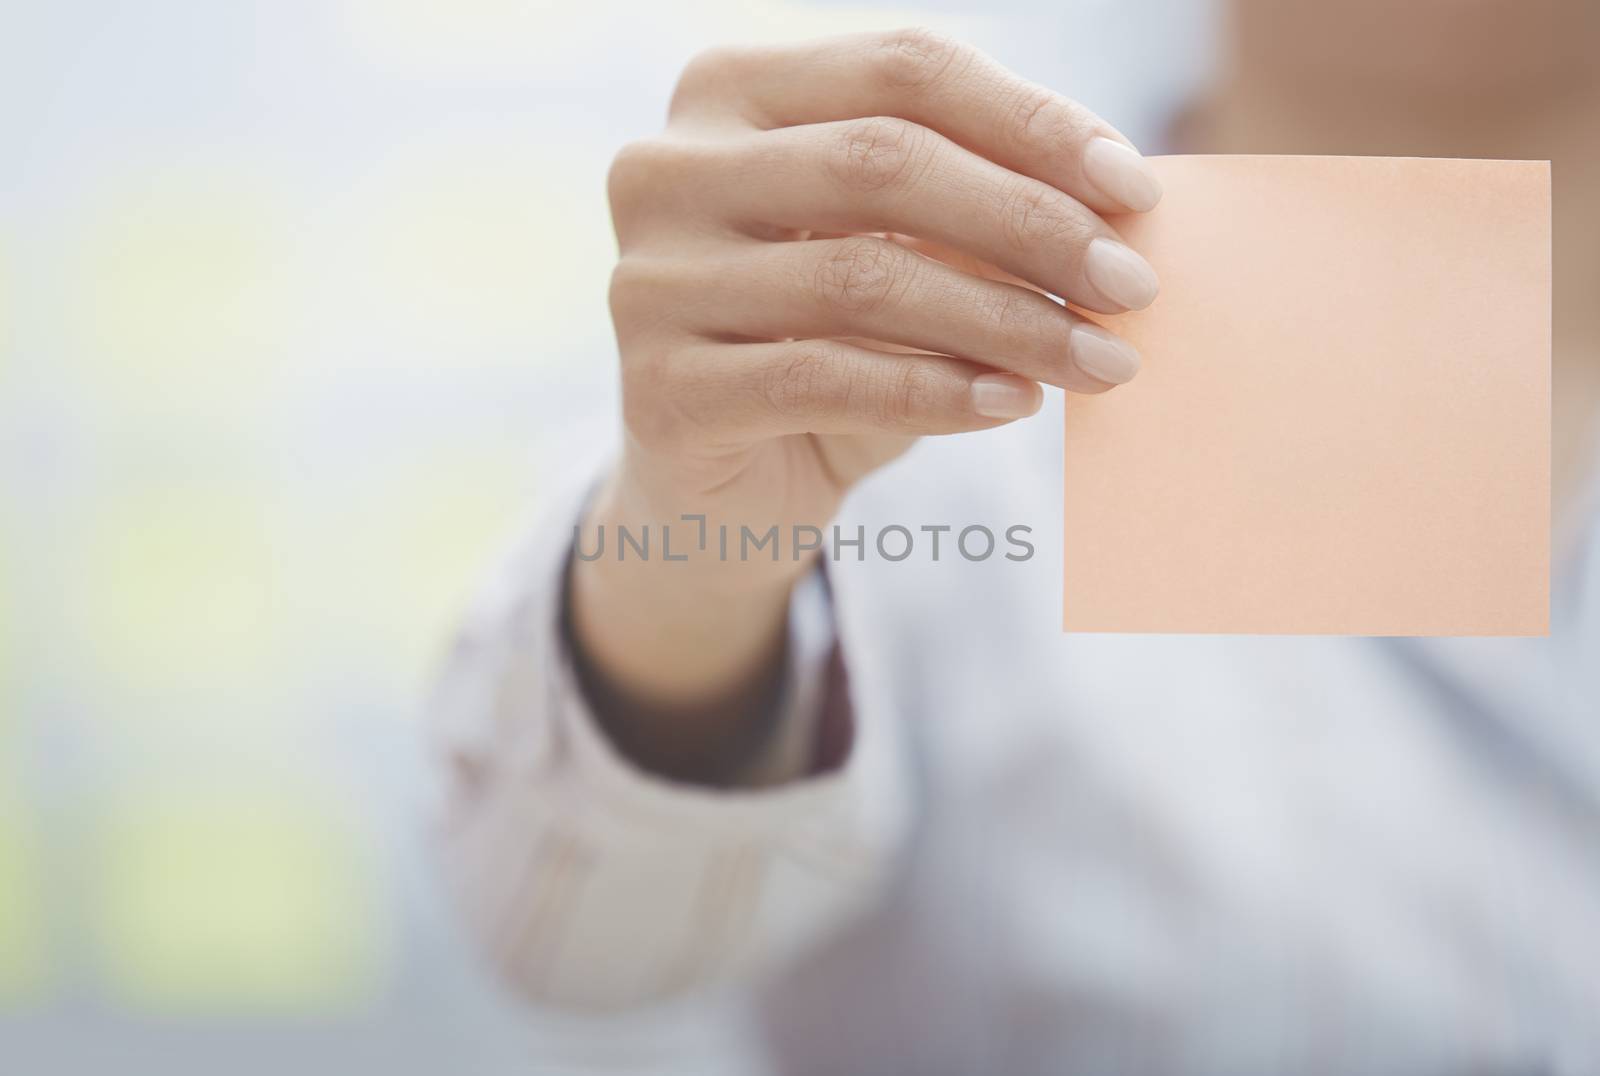 Woman holding sticky note with empty space